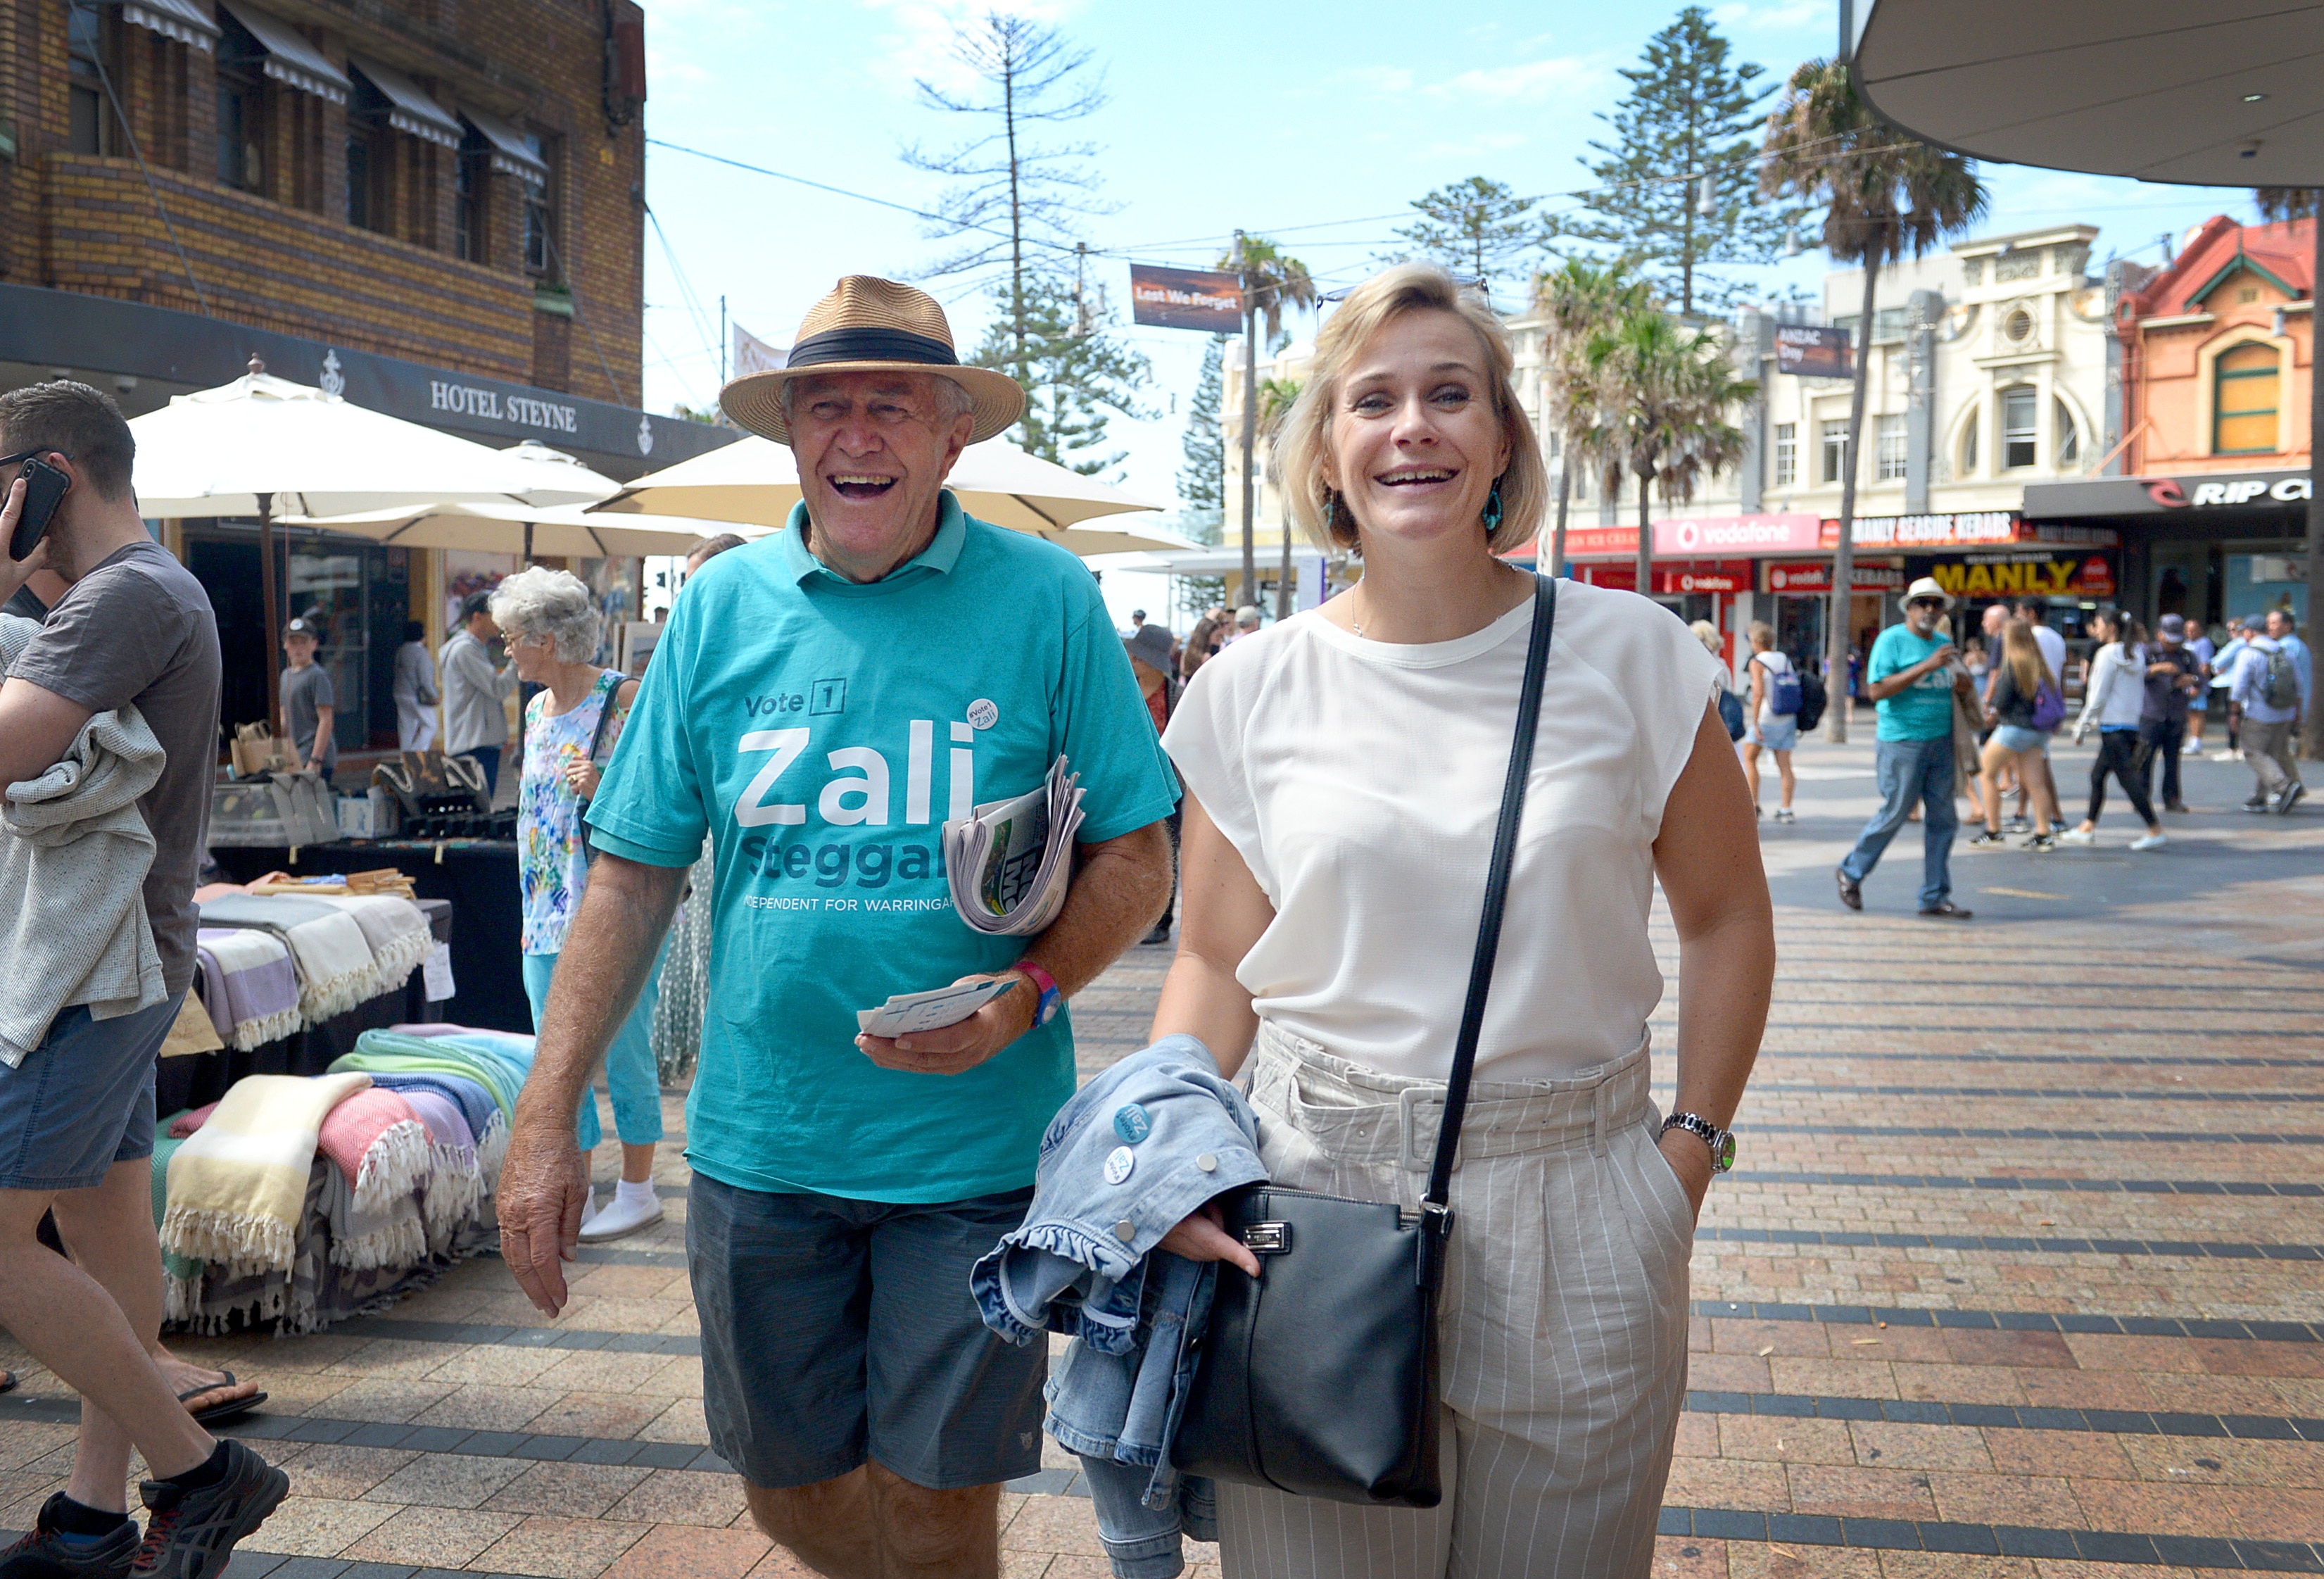 Independent candidate for Warringah Zali Steggall says she represents the "sensible centre".